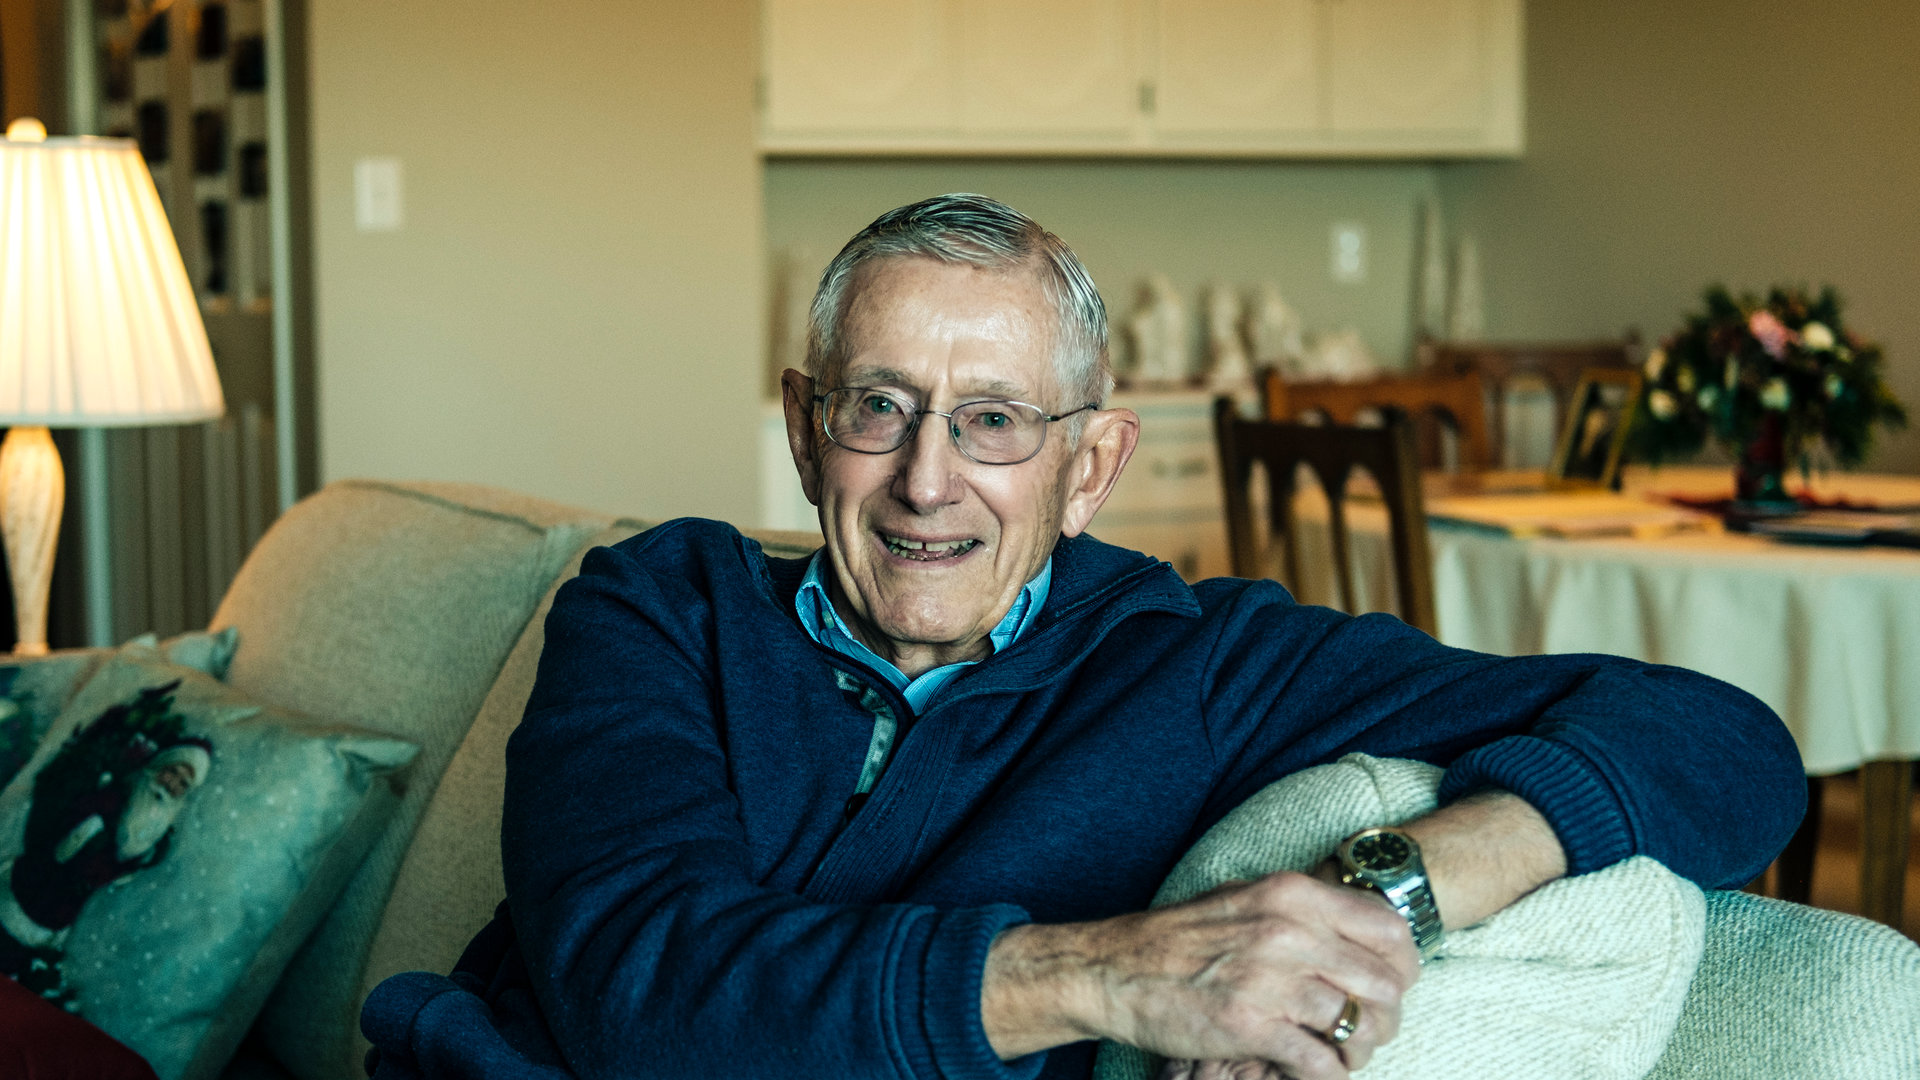 Dr. Wayne Thalhuber '60 (biology) poses for a portrait in his Mendota Heights home December 20, 2016. Thalhuber is the recipient of the 2017 St. Thomas Day Humanitarian Award. 